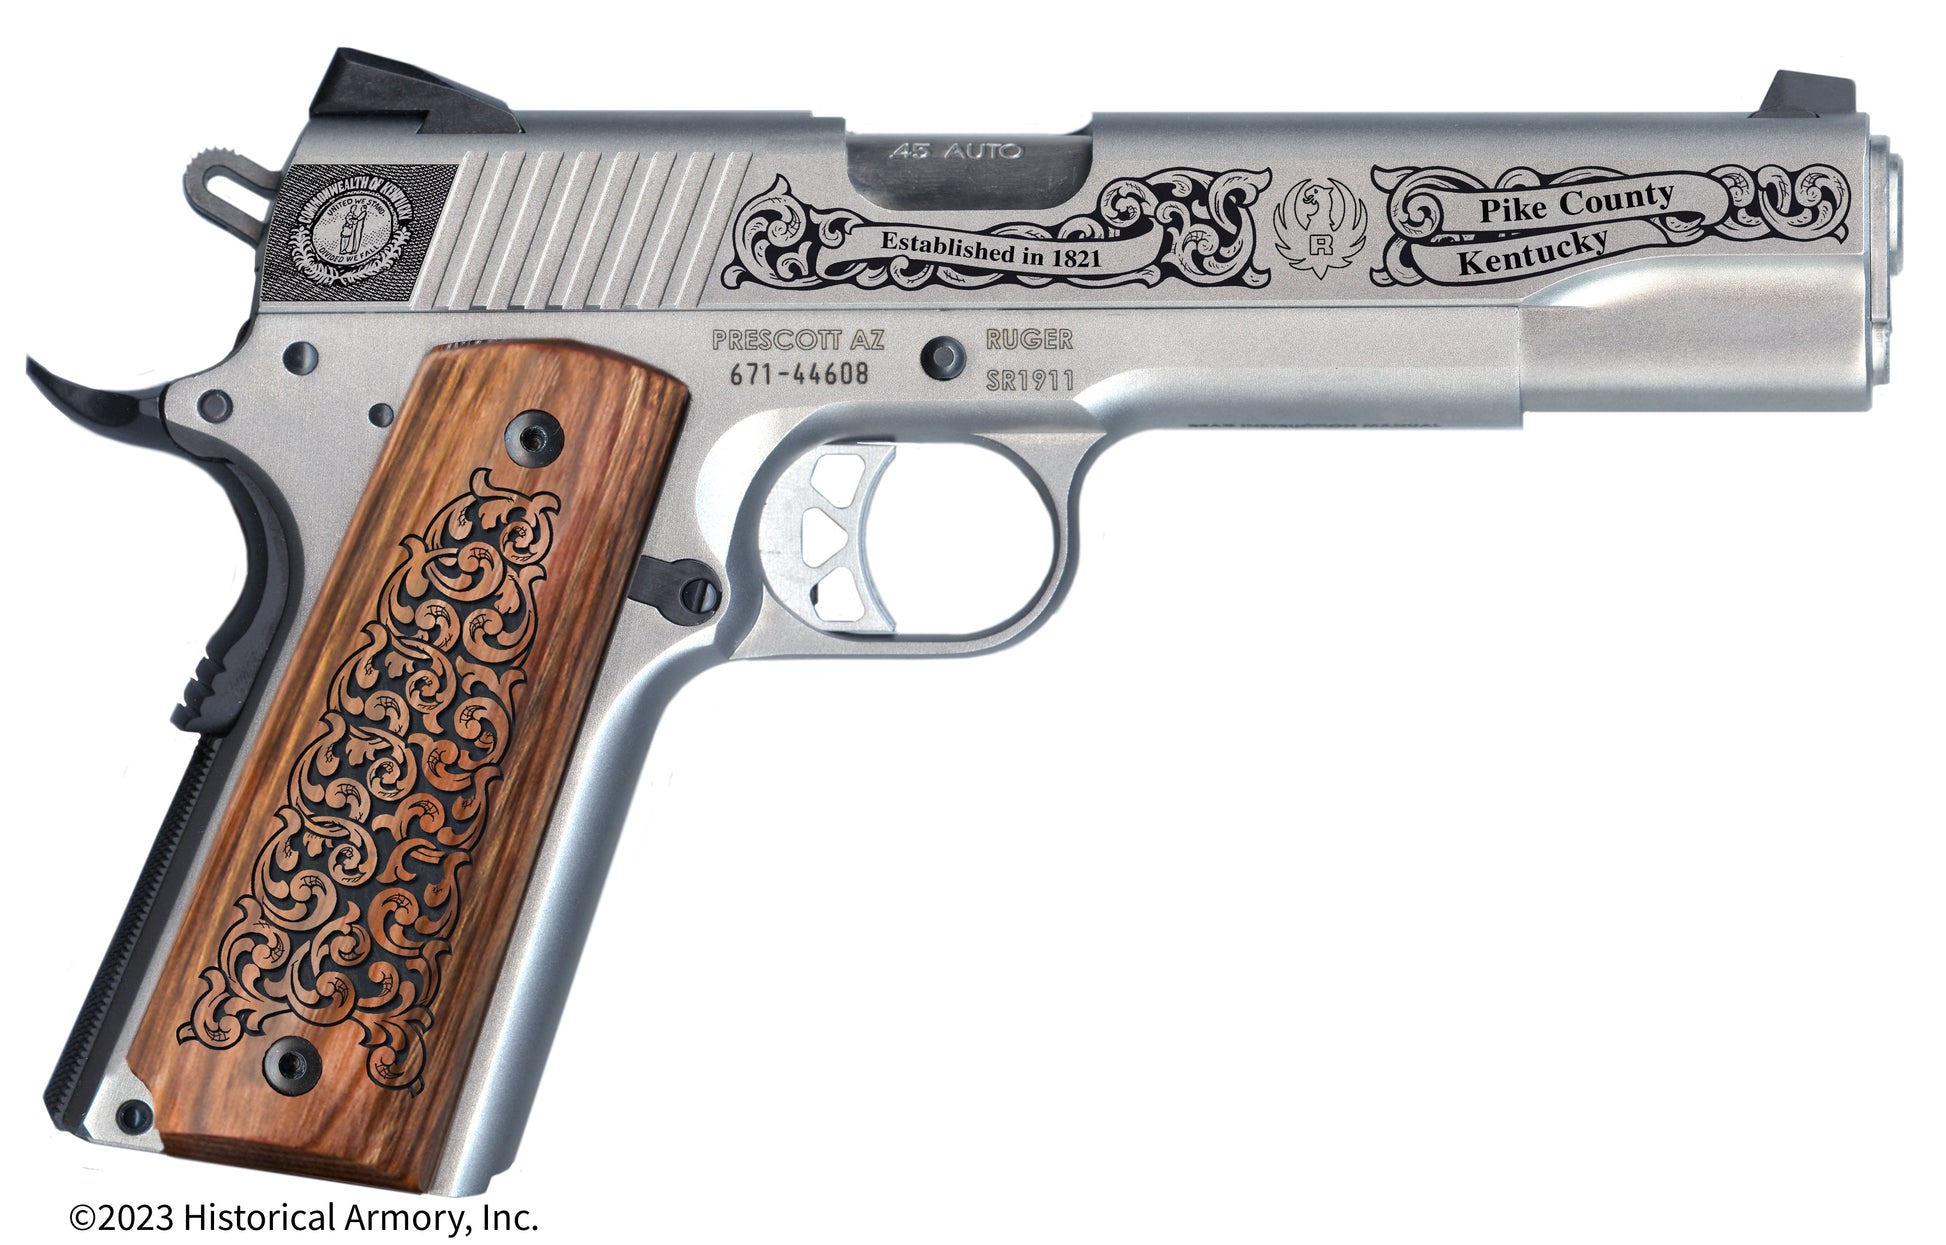 Pike County Kentucky Engraved .45 Auto Ruger 1911